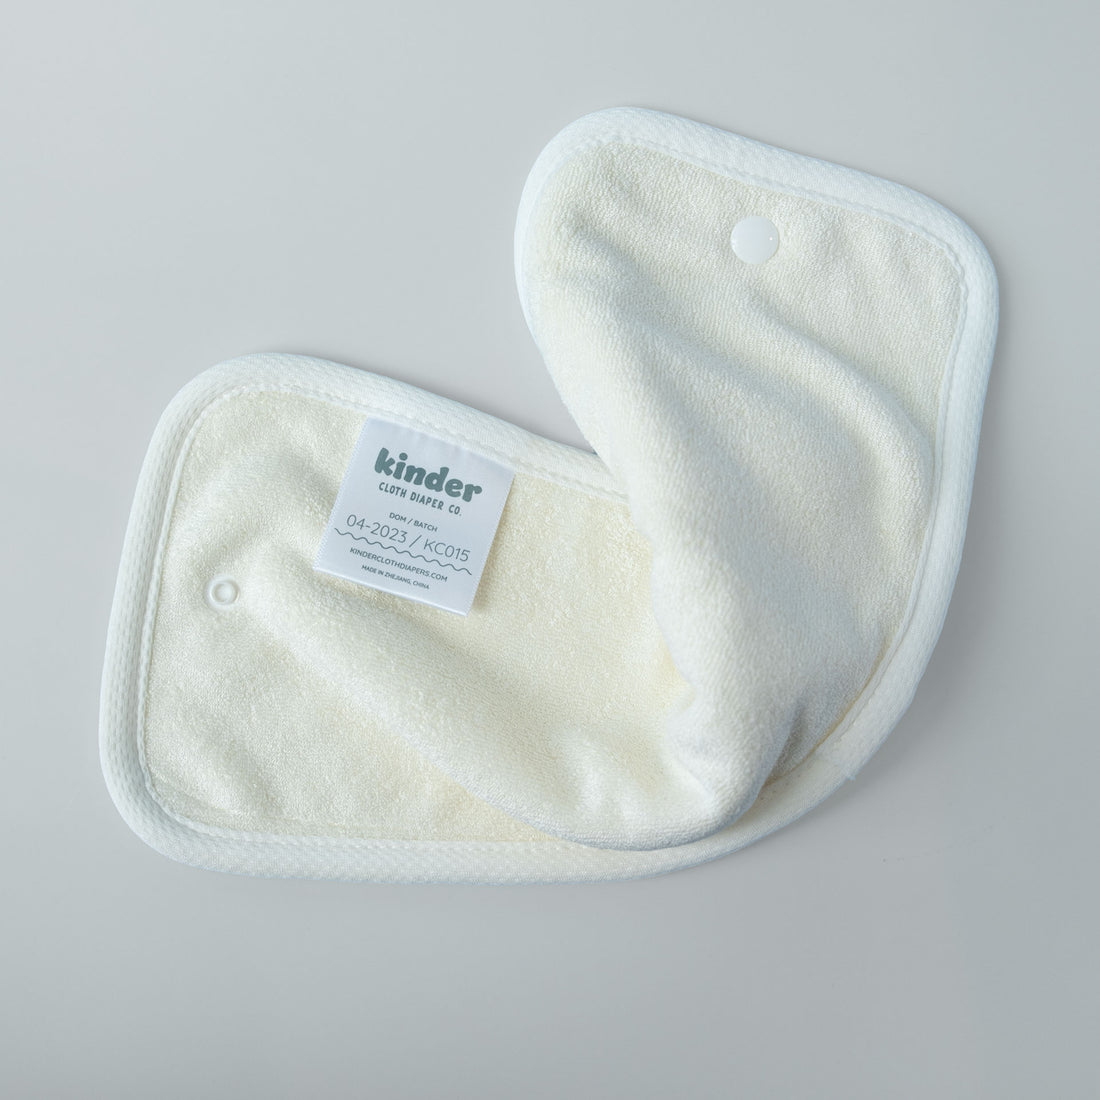 Buy Rachna's Organic Cotton Diaper Inserts Wet-Free High Absorbent Super  Soft Reusable Baby Liner Pad Set for Adjustable Cloth Diapers - White -  Pack of 2 (36 x 14 Centimetres) Online at